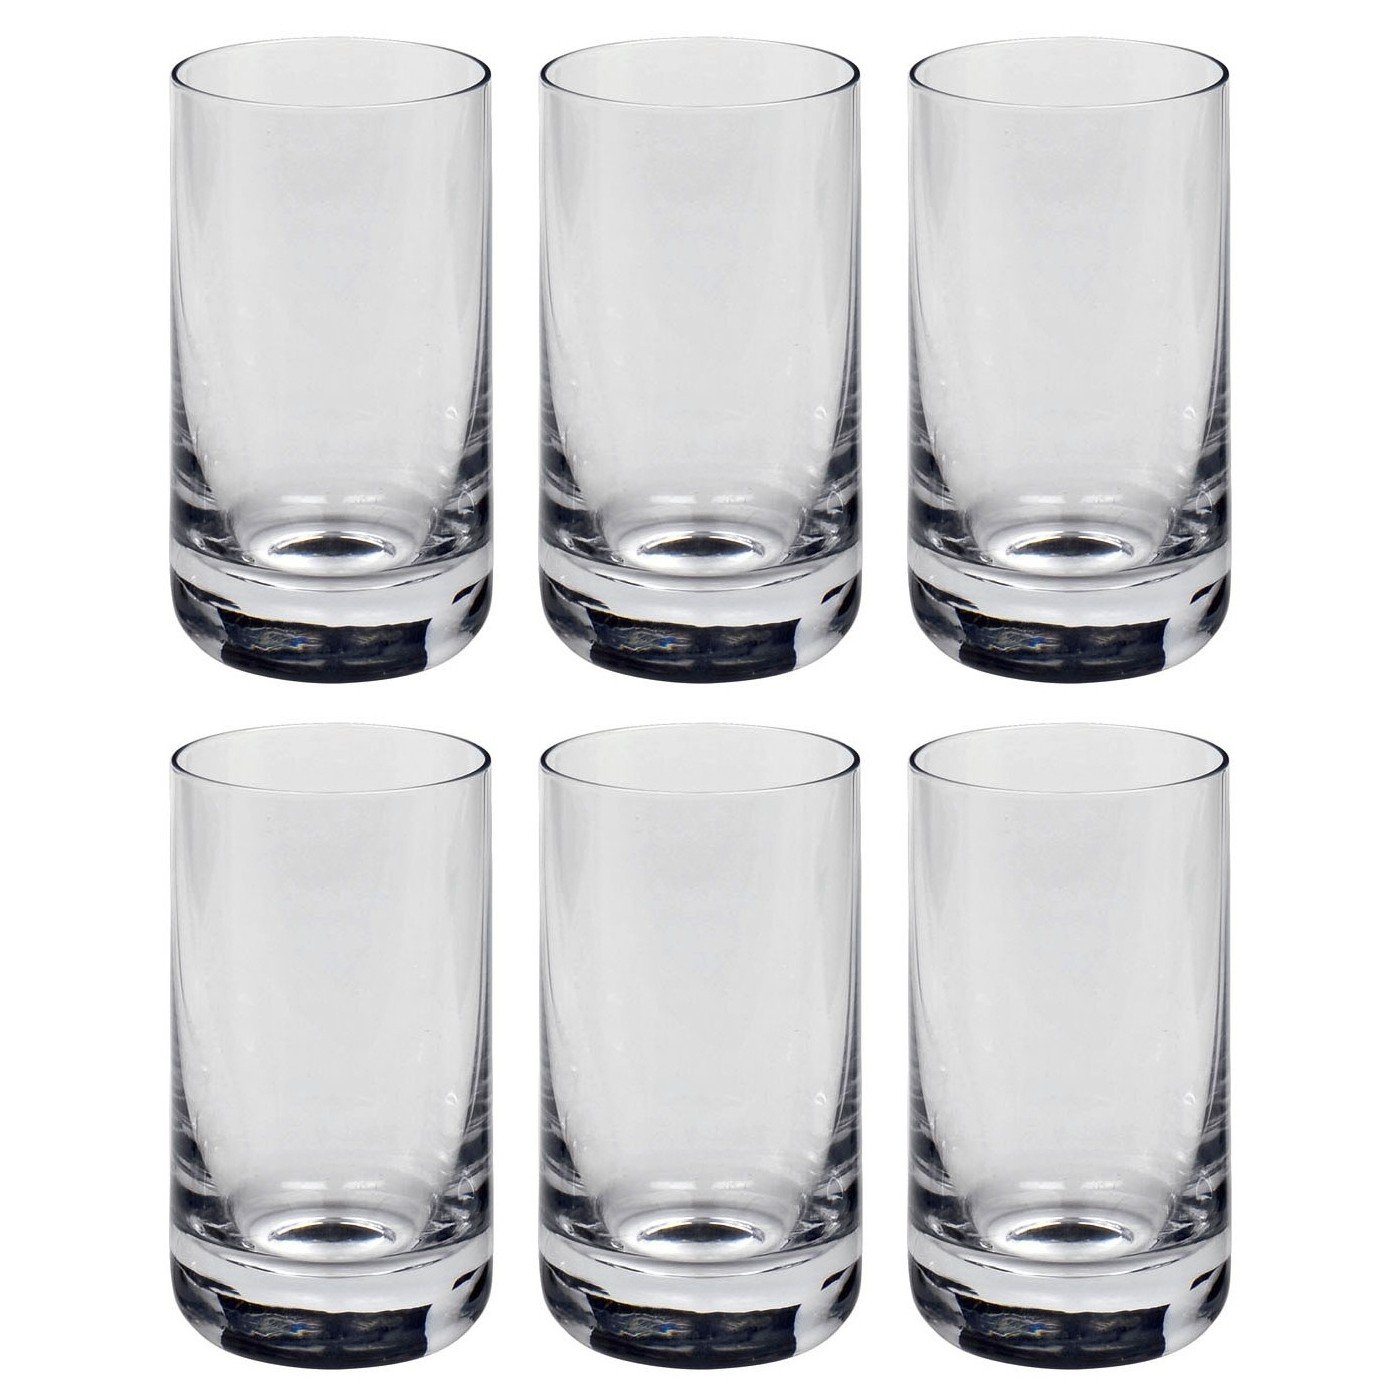 Schott Zwiesel water glass 7745 Convention, 255ml, H 11.6 cm (Pack of 1)